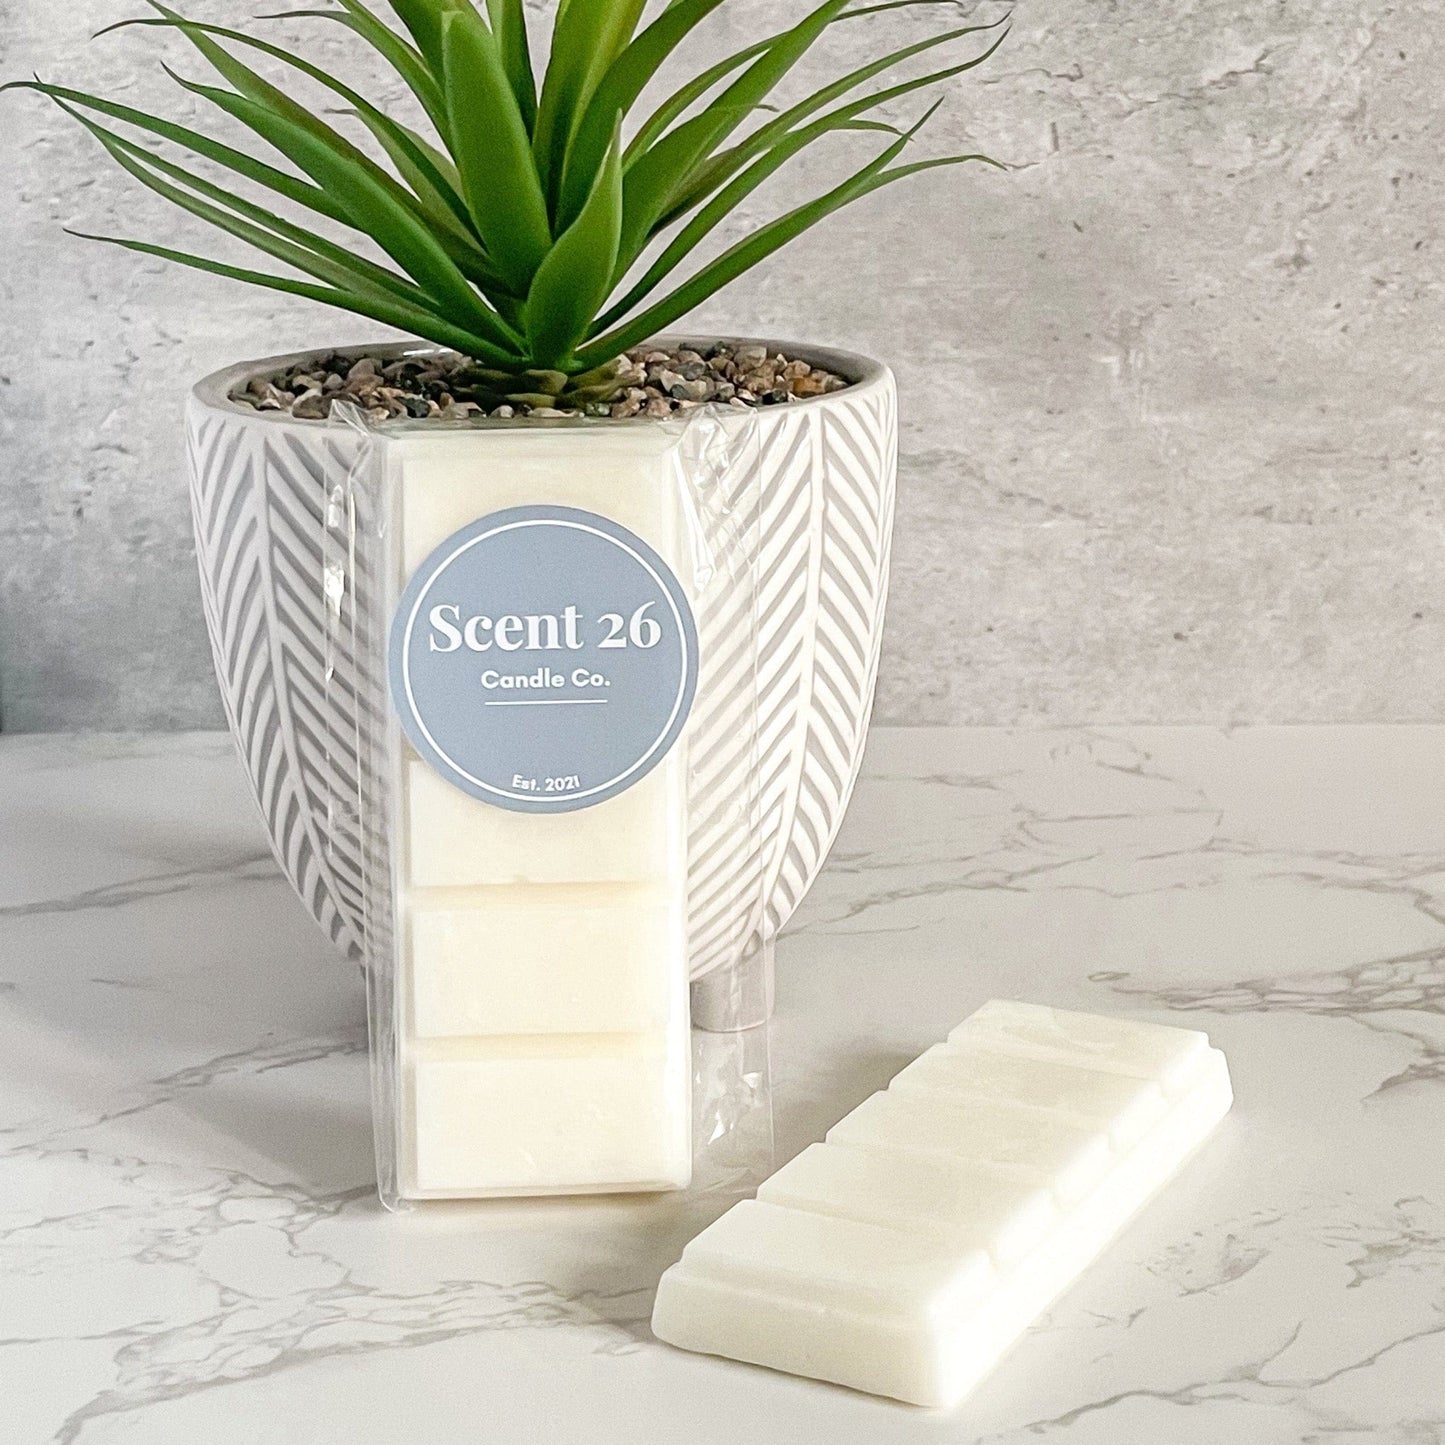 Laundry Scent Wax Melts